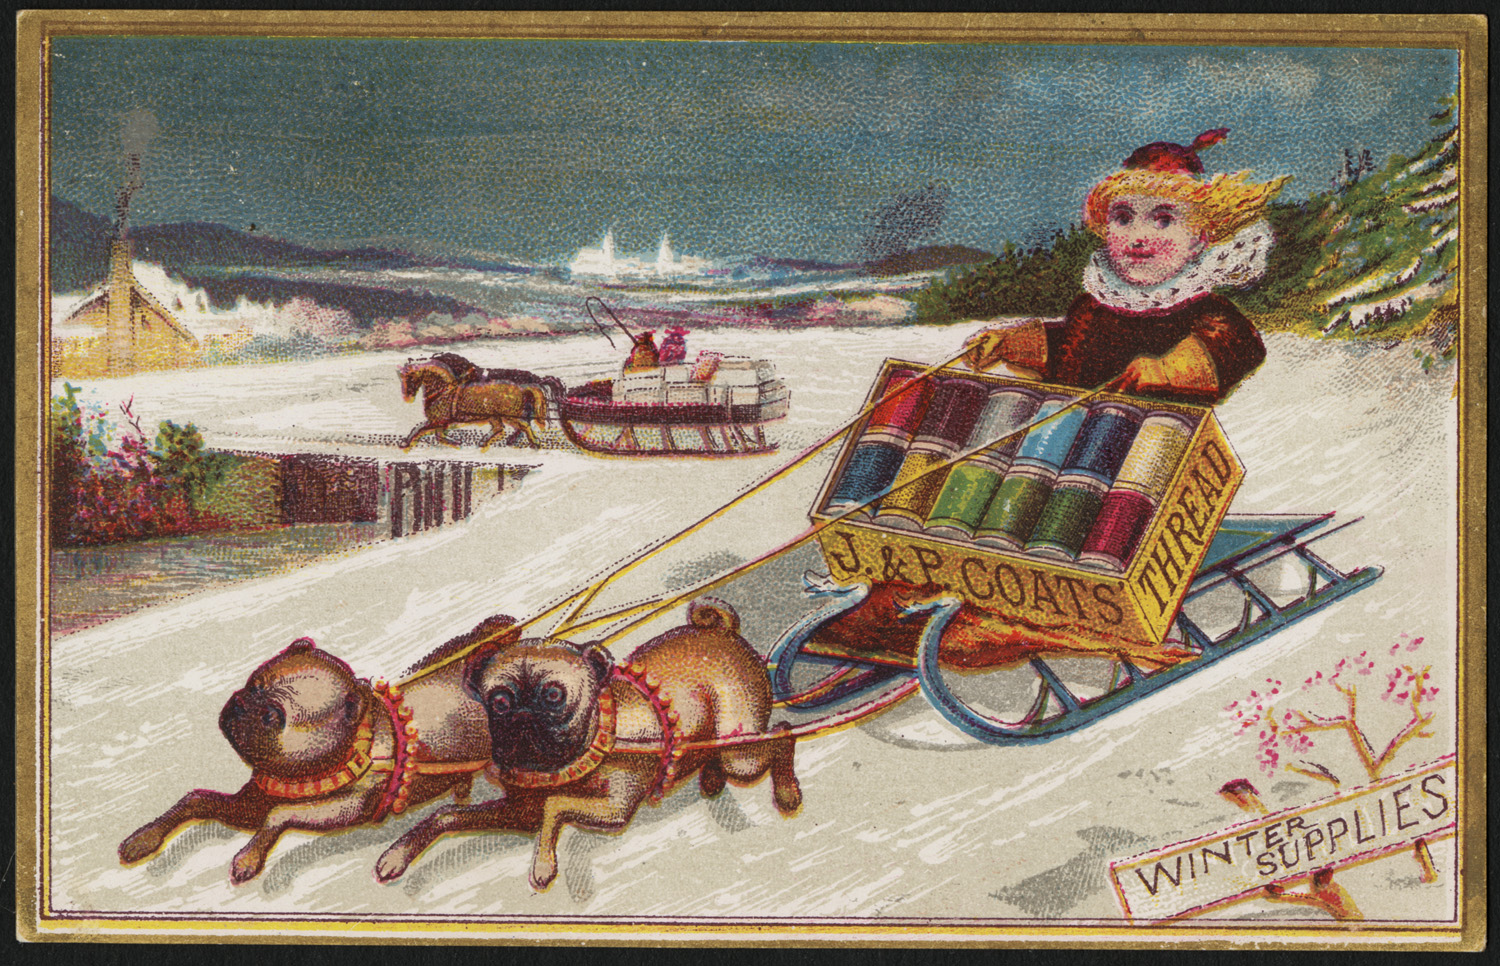 a postcard shows a woman in her sled